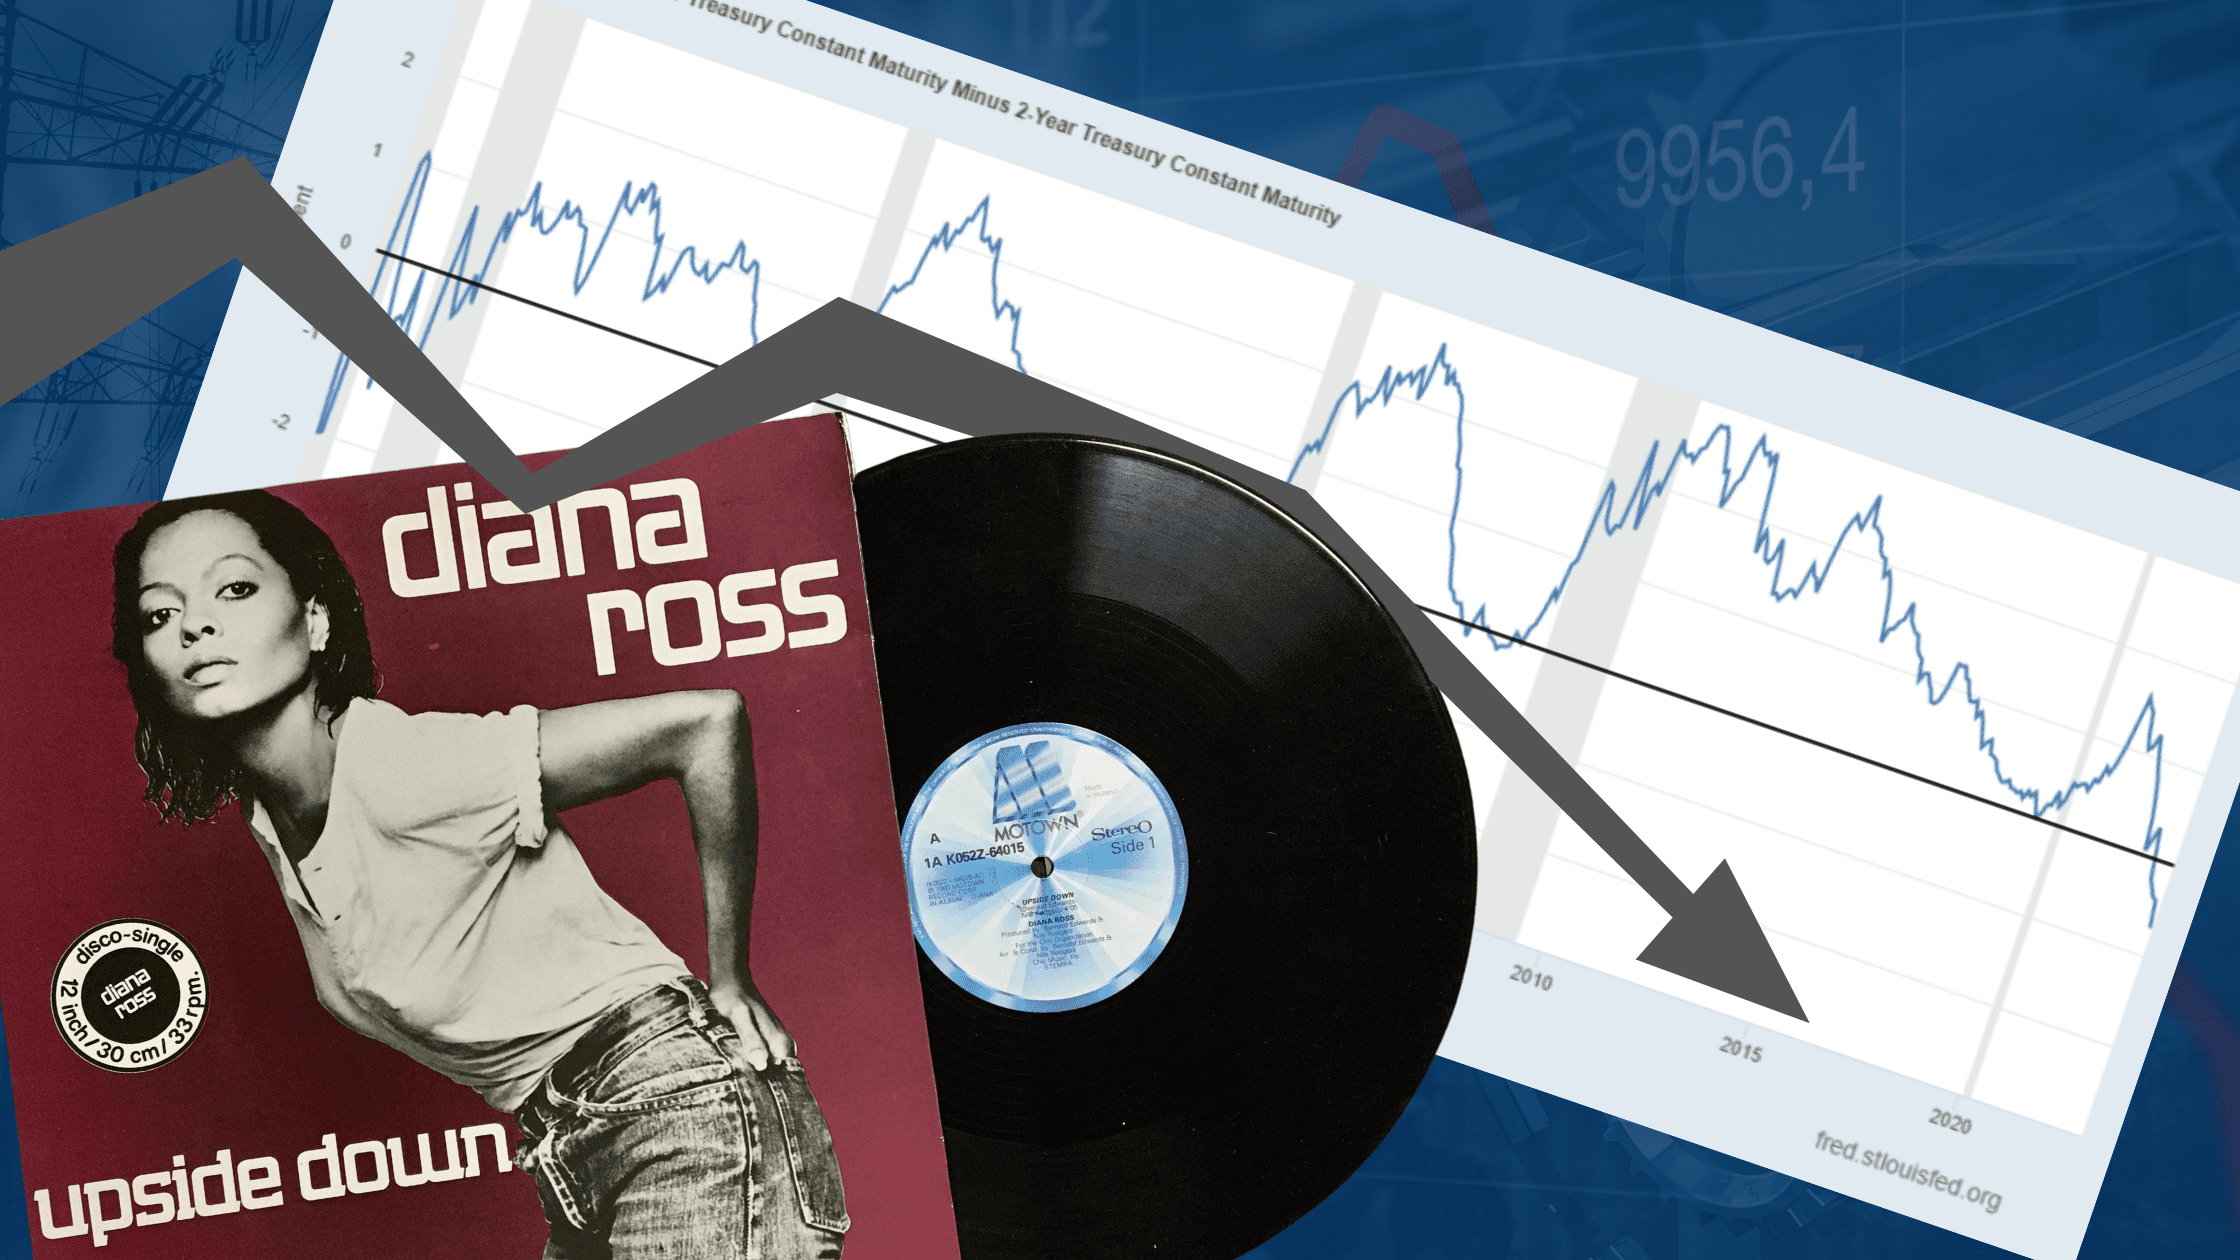 Forecasting recessions: The Inverted Yield Curve and… Diana Ross?